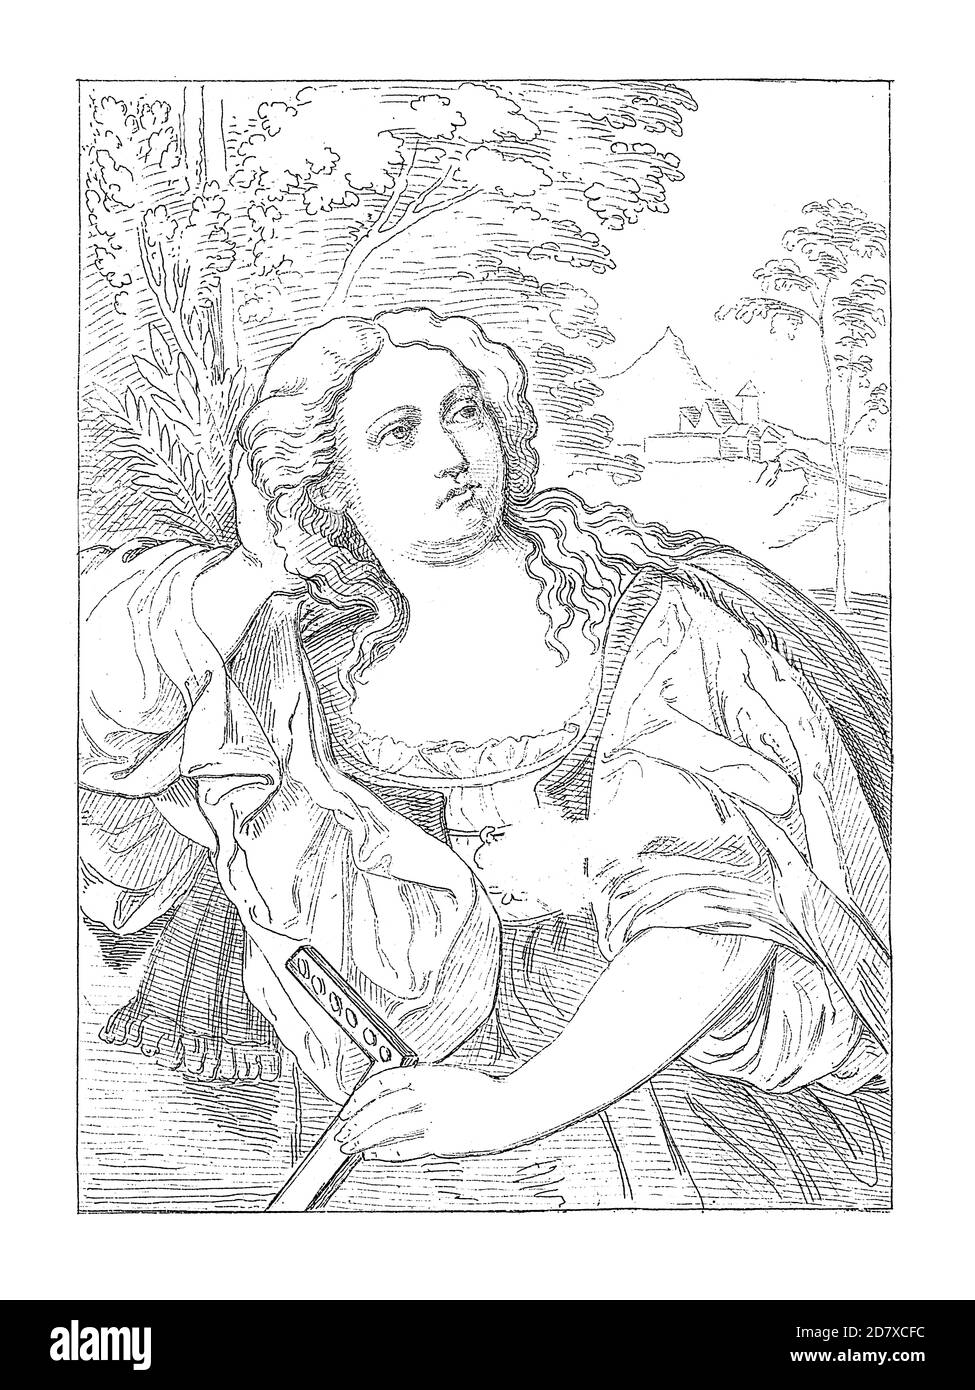 19th-century engraving of painting by Giorgione, Italian painter of the High Renaissance (c. 1477/8 - 1510). Illustration published in Systematischer Stock Photo